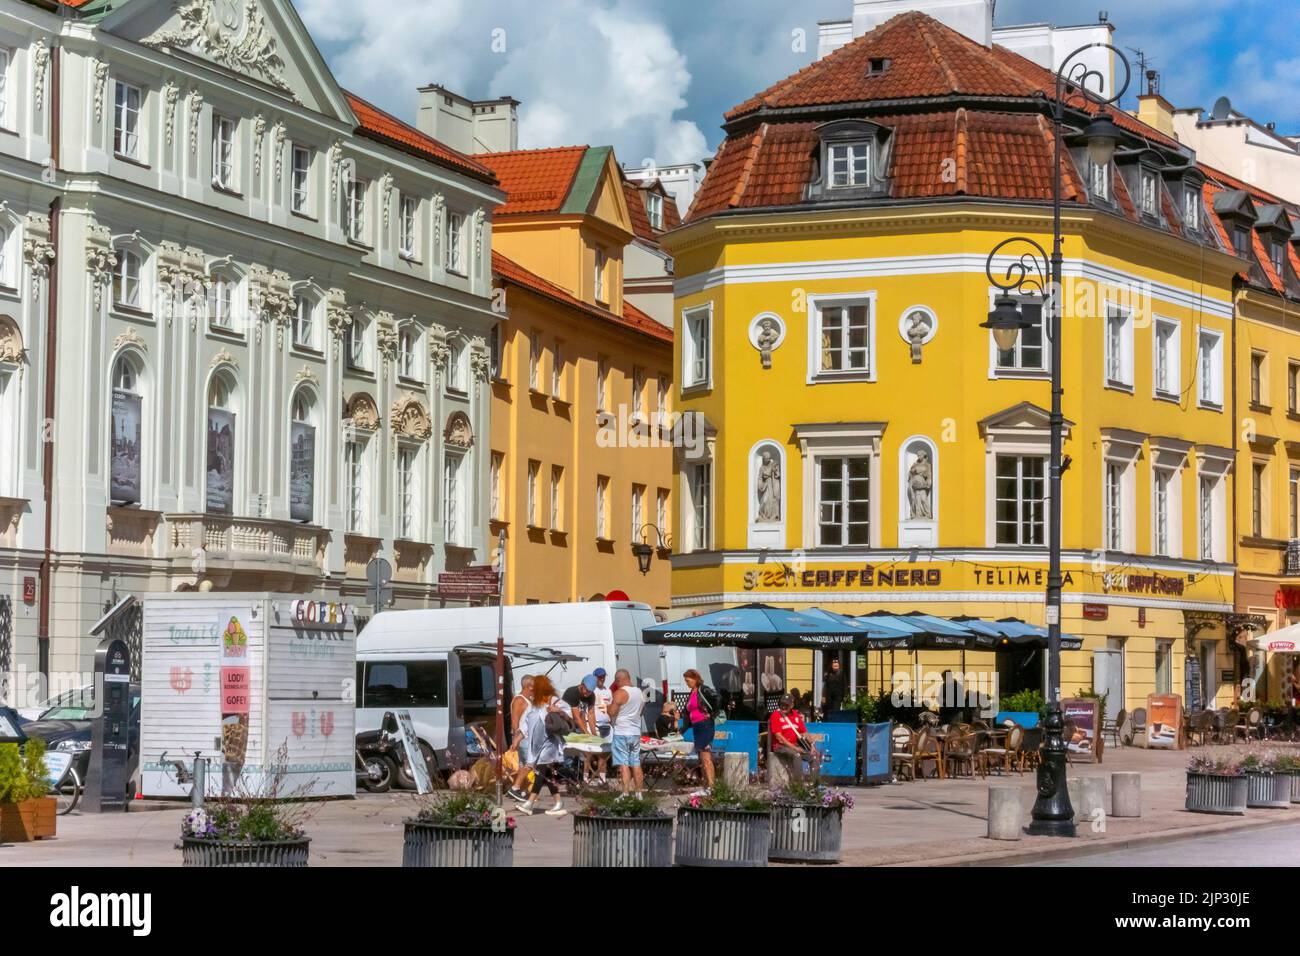 Warsaw, Poland, Street Scenes, Old Town Center, Historic Architecture Stock Photo